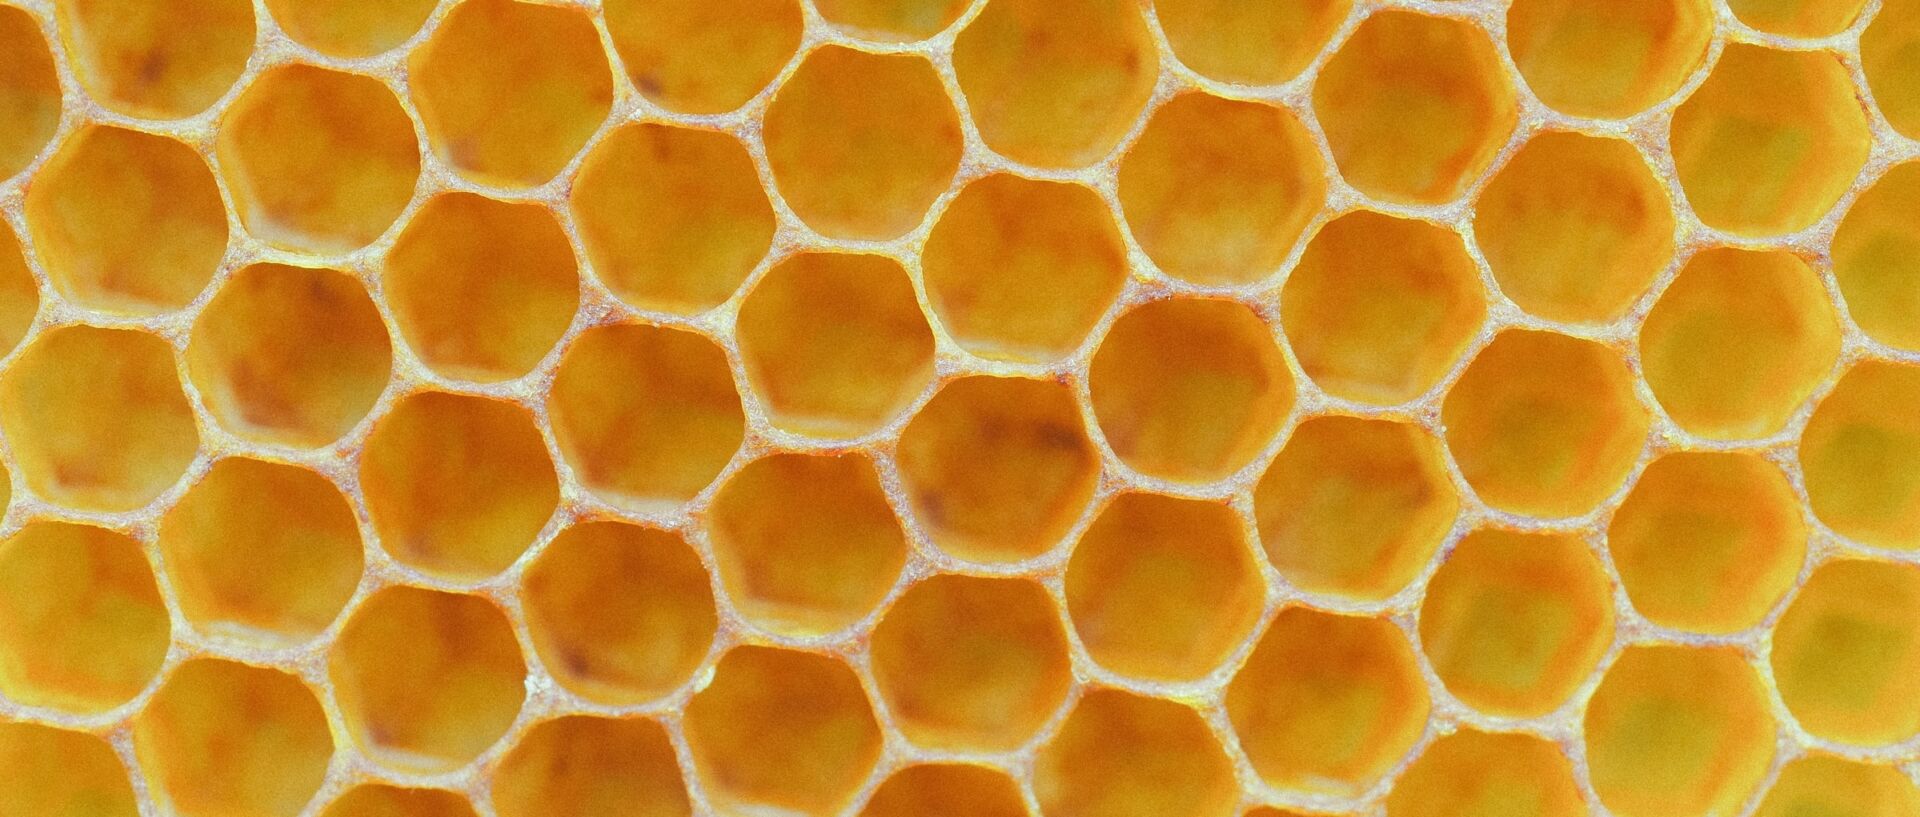 Beeswax in Industry